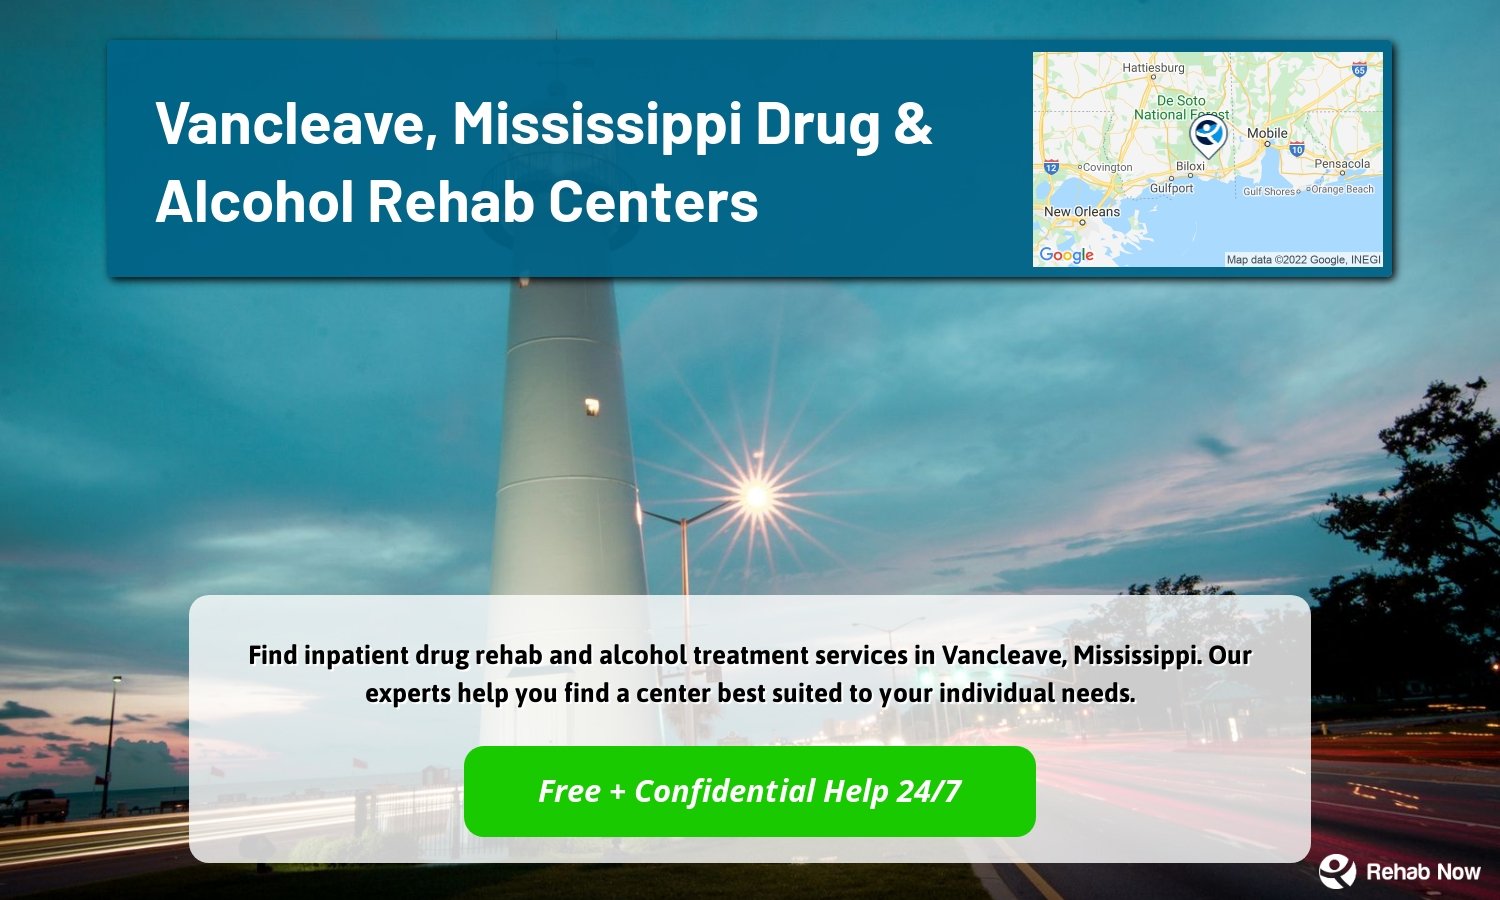 Find inpatient drug rehab and alcohol treatment services in Vancleave, Mississippi. Our experts help you find a center best suited to your individual needs.